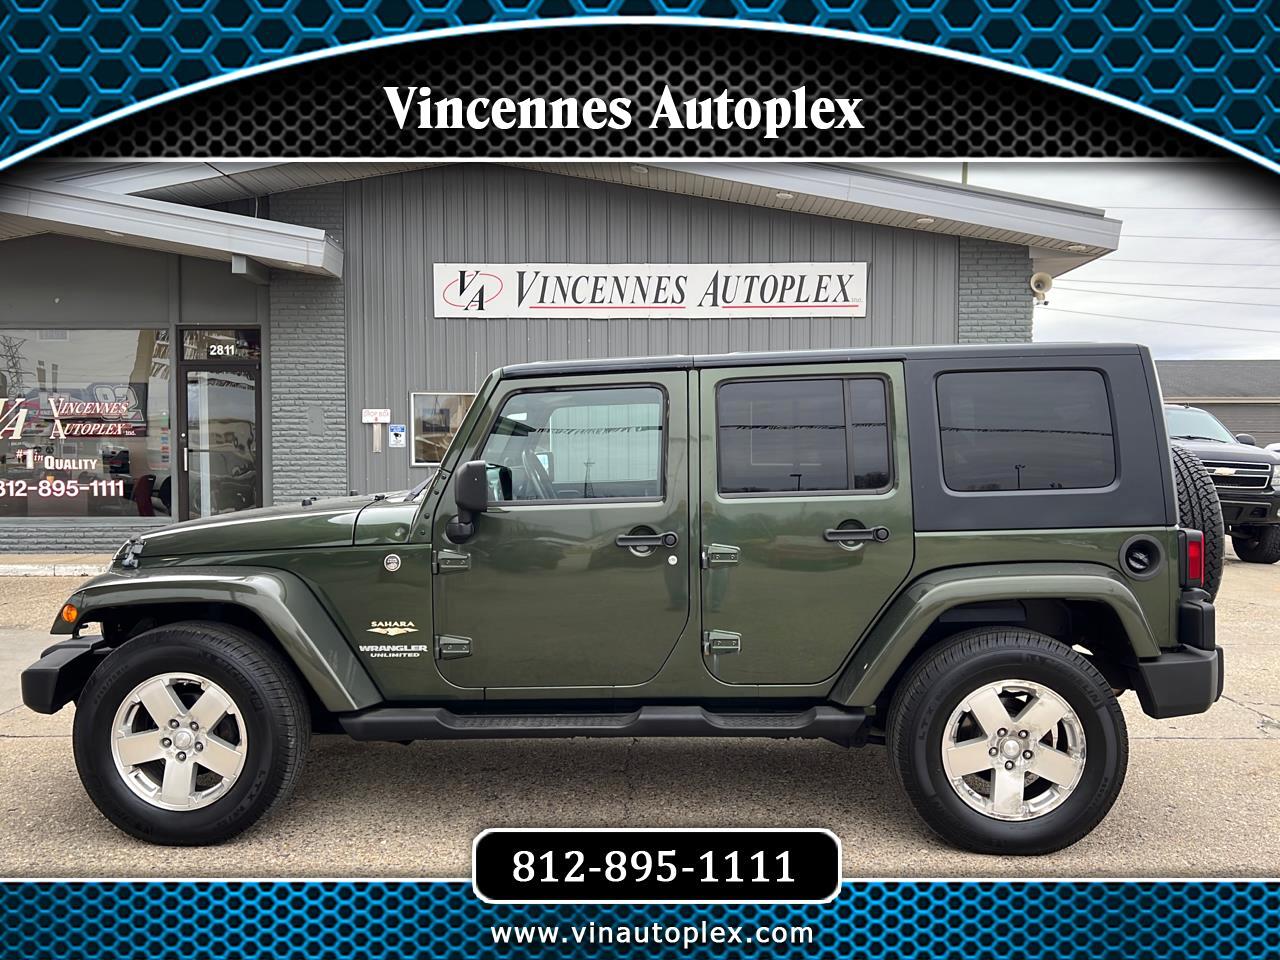 Used 2008 Jeep Wrangler Unlimited Sahara 4WD for Sale in Vincennes IN 47591  Vincennes Autoplex